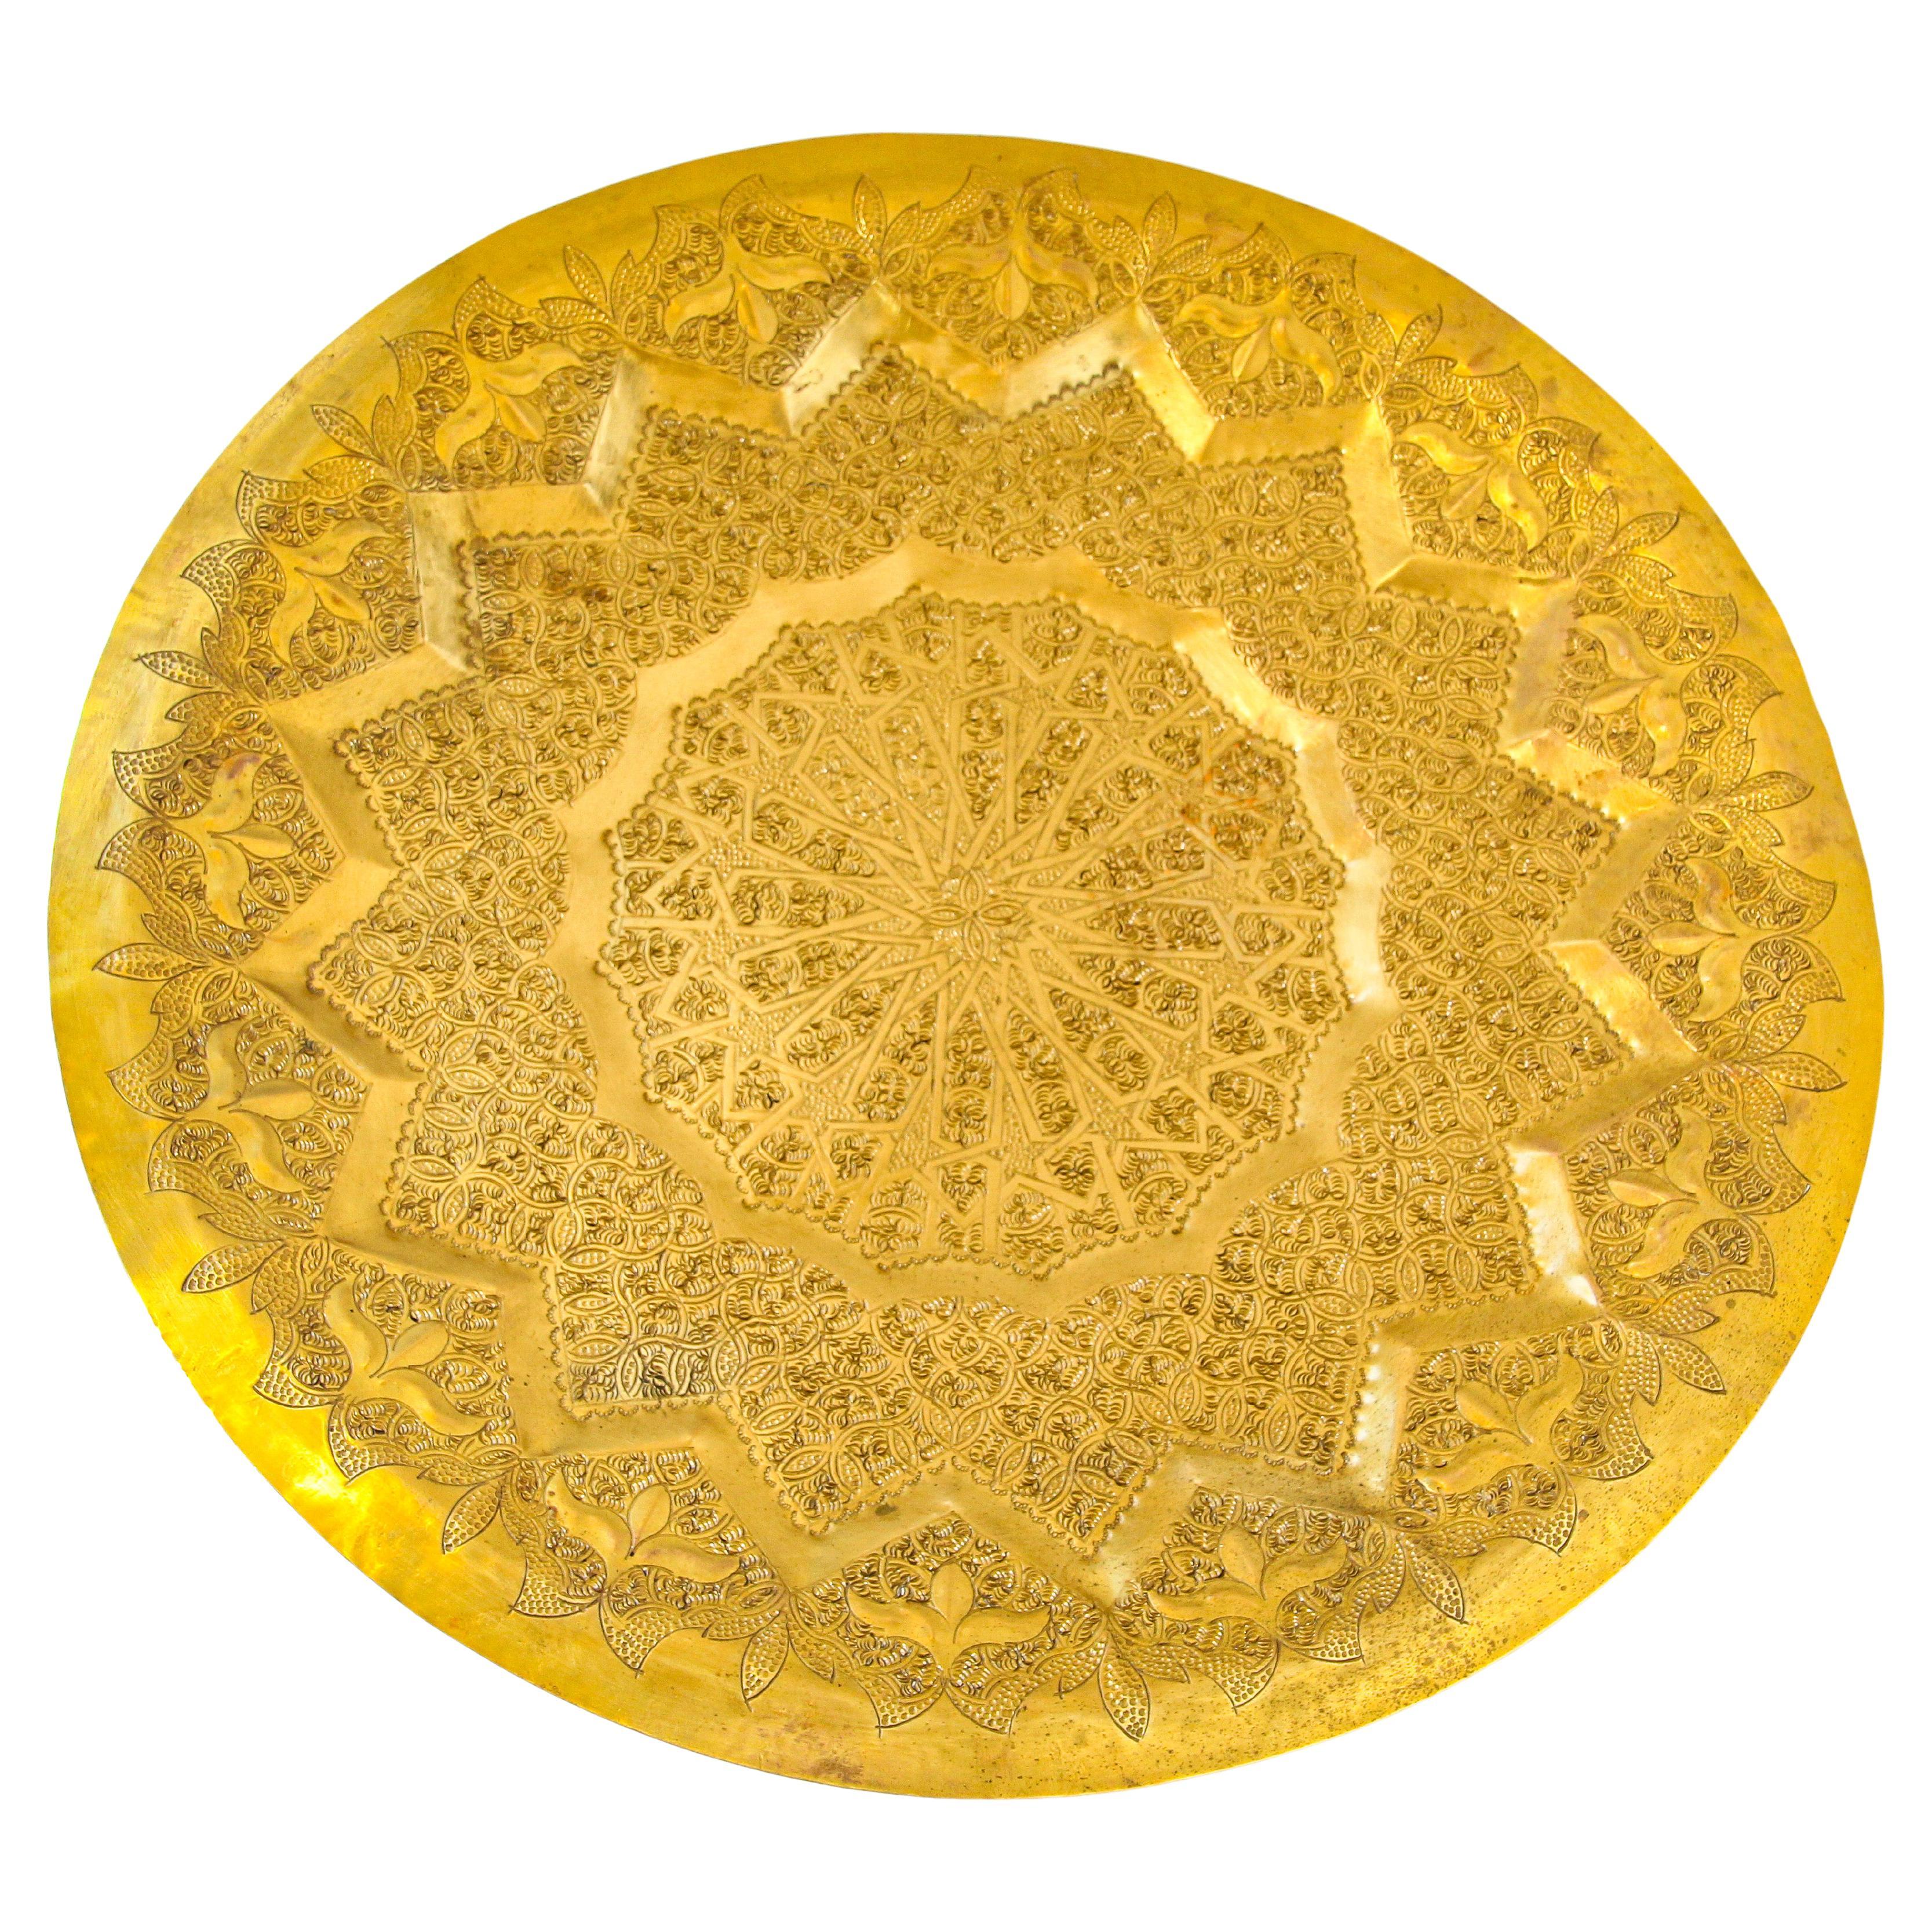 Fabulous Moroccan Moorish hand-hammered brass tray, intricate multi dimension artwork, very fine Islamic Metalwork brass repousse designs.
Handcrafted wall hanging decorative brass tray with a copper hook in the back.
Fabulous hand-etched wall